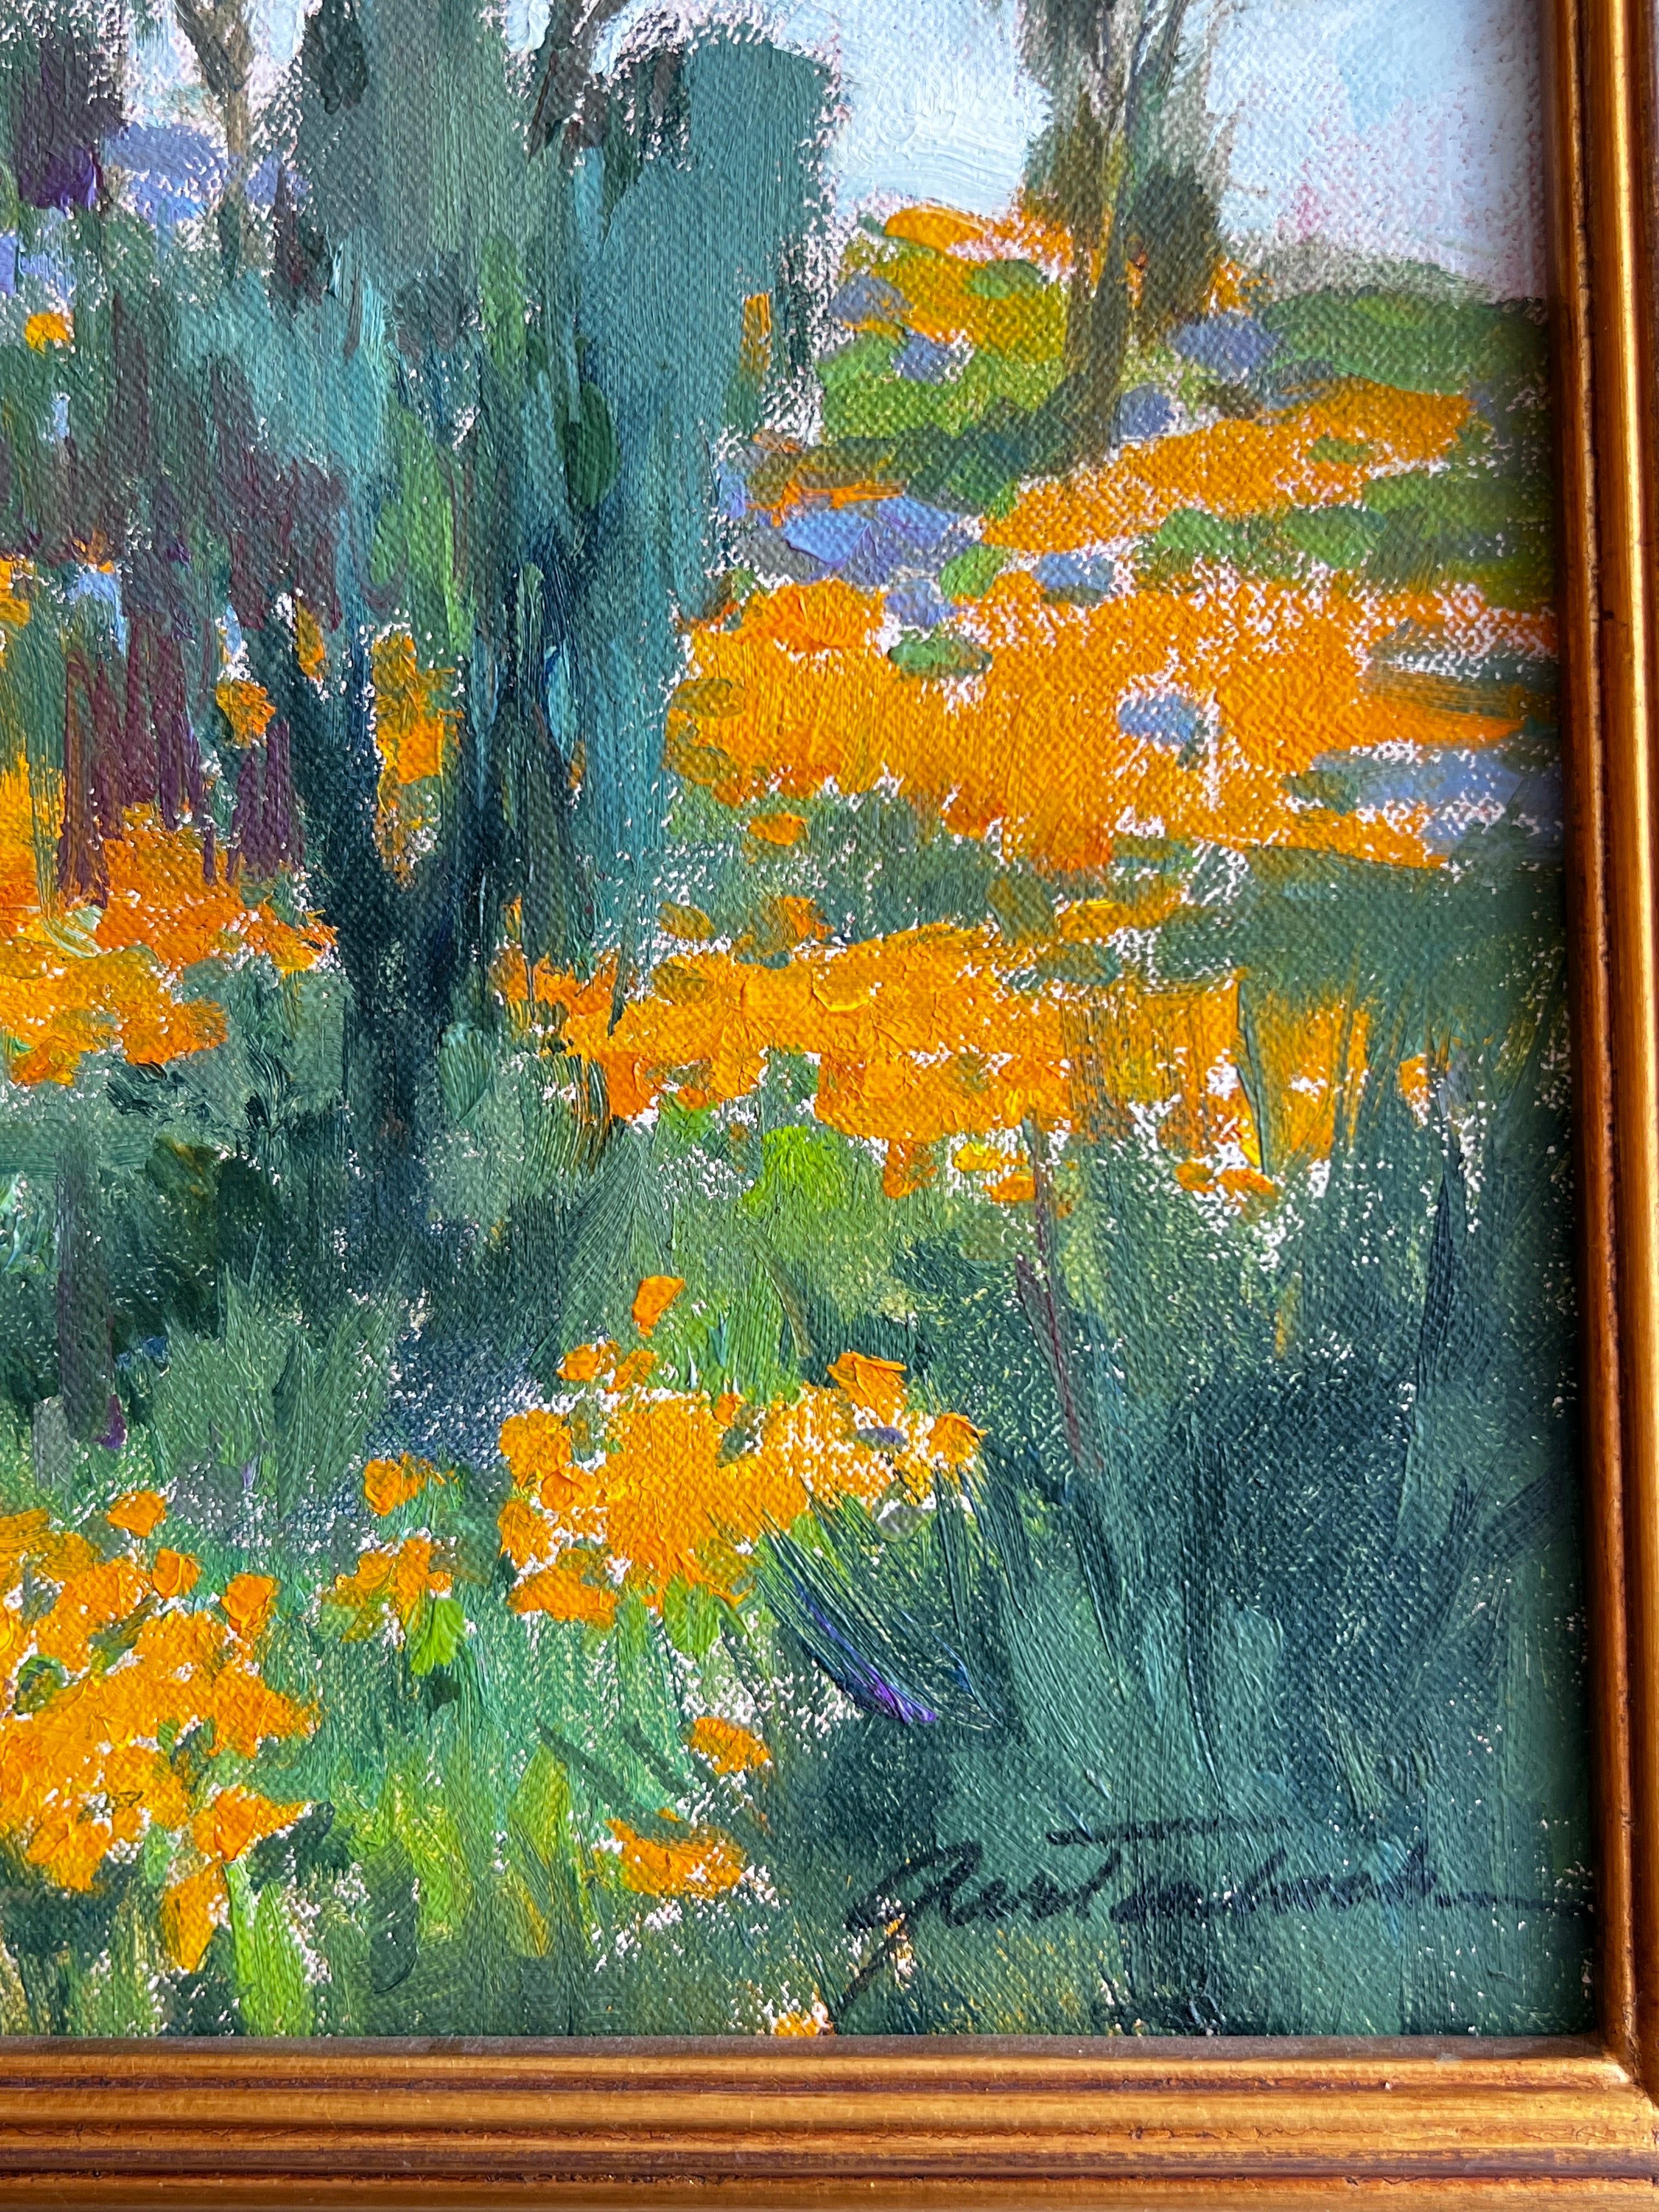 Lake Elsinore Poppies. - Brown Landscape Painting by Lynn Gertenbach